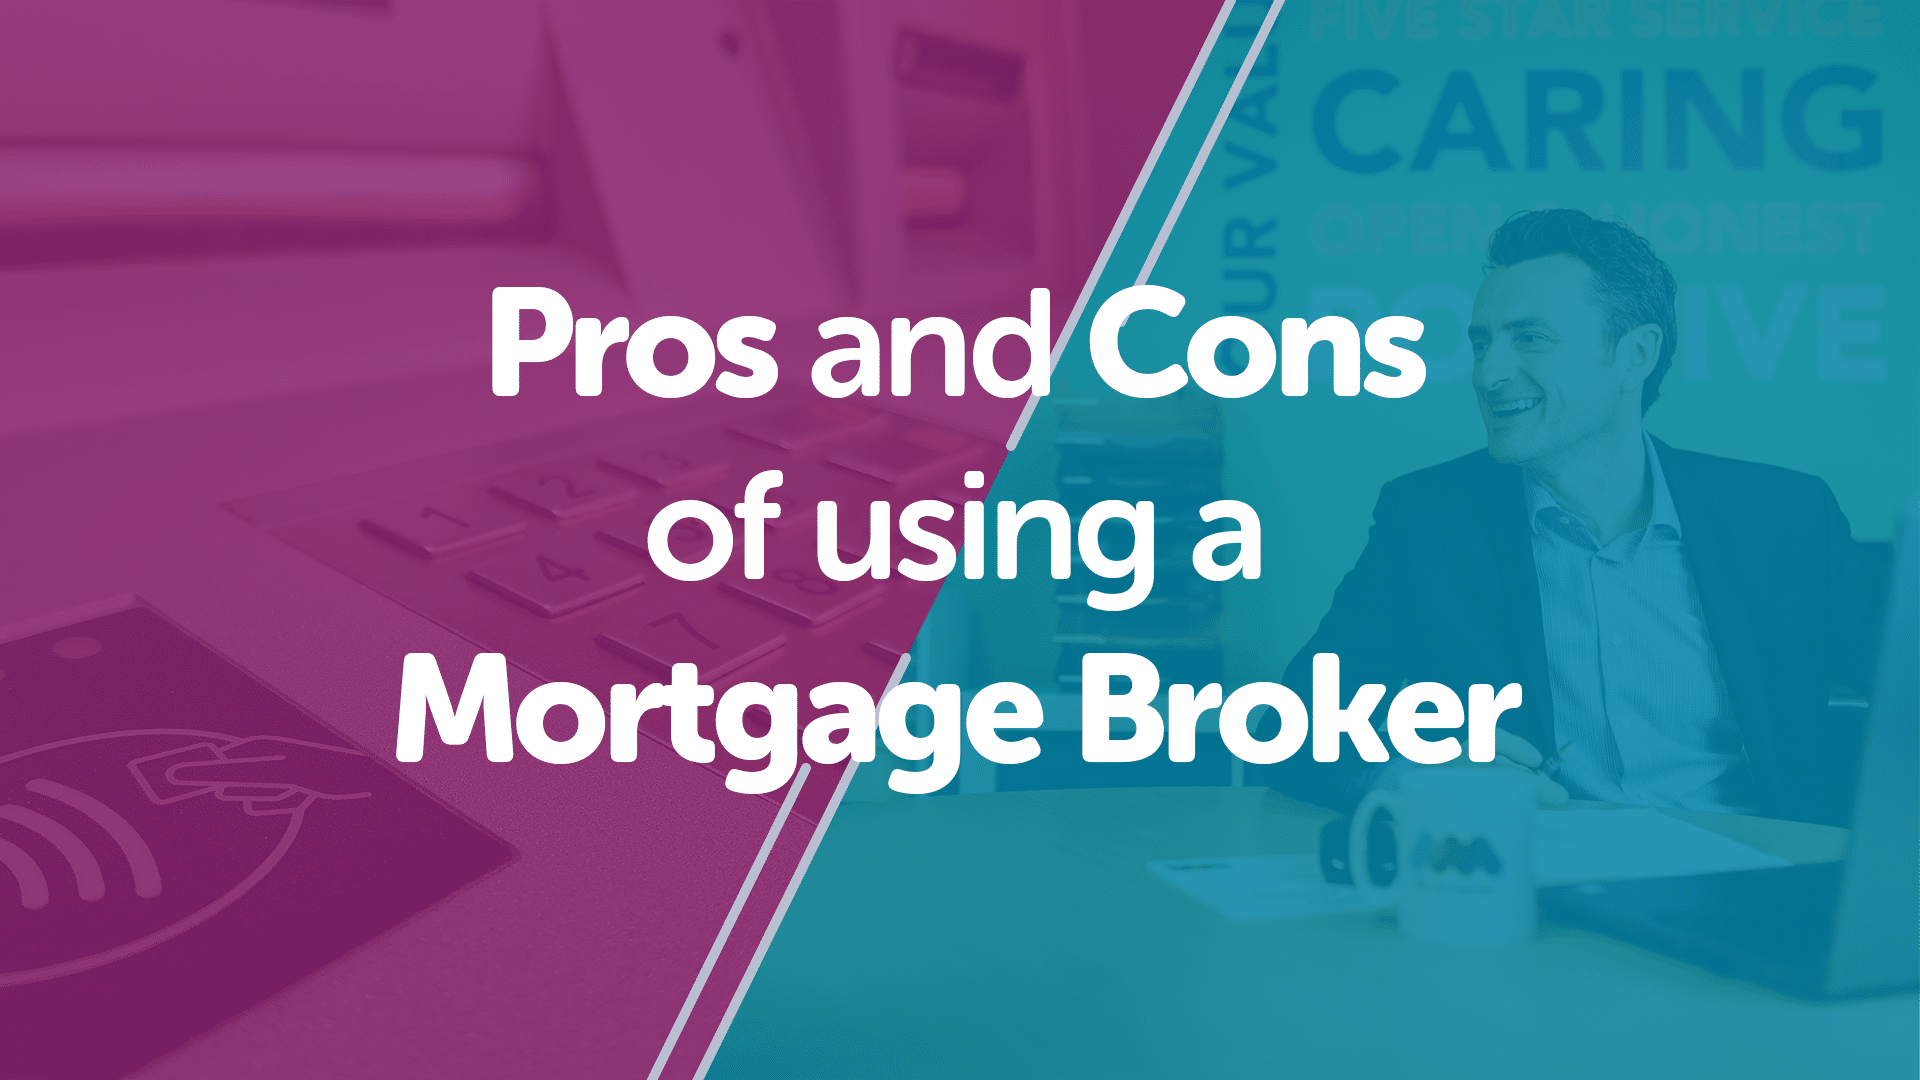 The Pros and Cons of Using a Mortgage Broker in Leicester